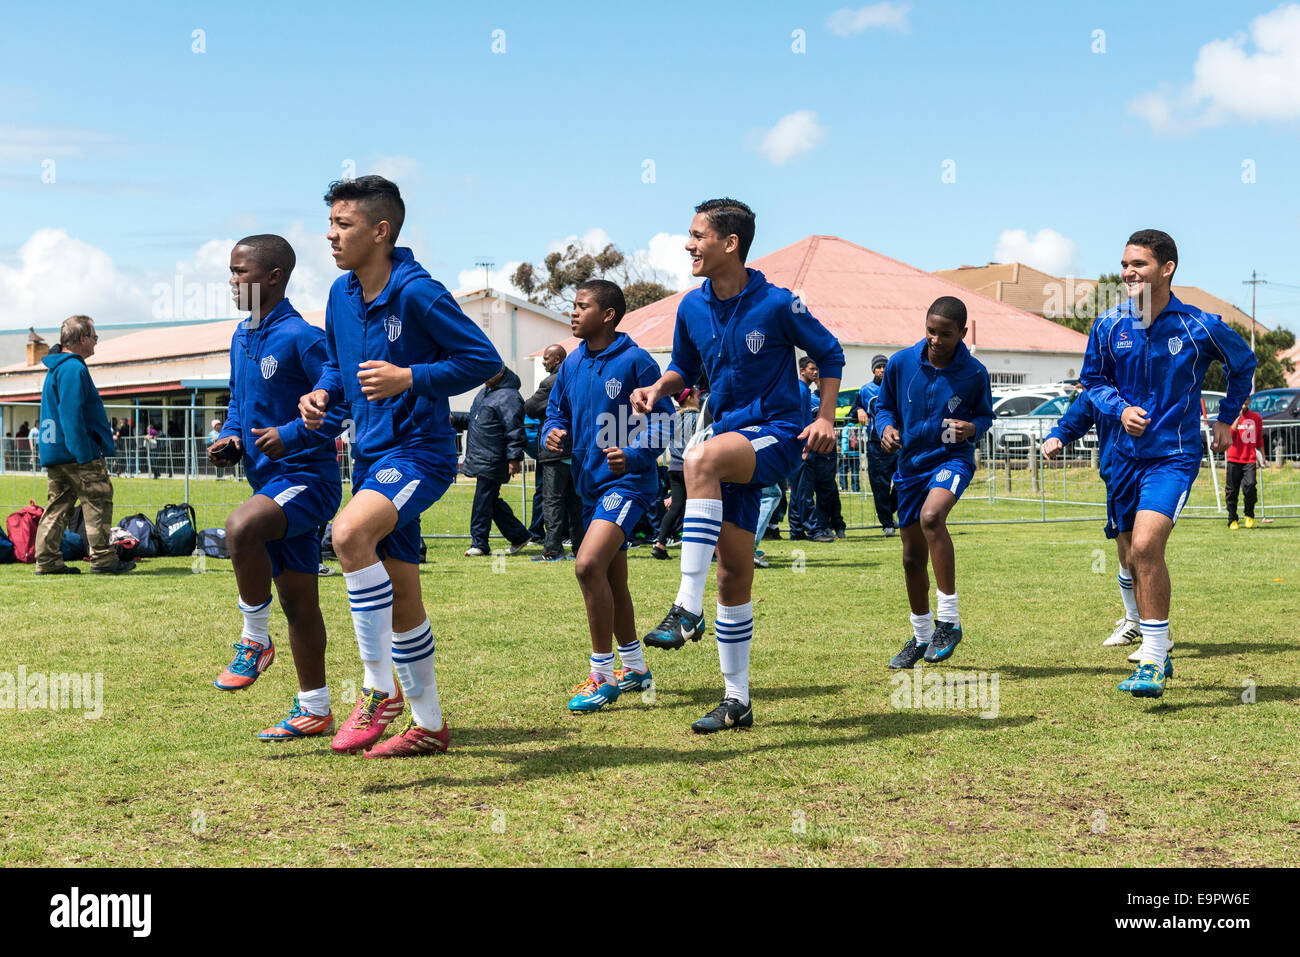 Junior football team practices warm-up before the match, Cape Town, South Africa Stock Photo